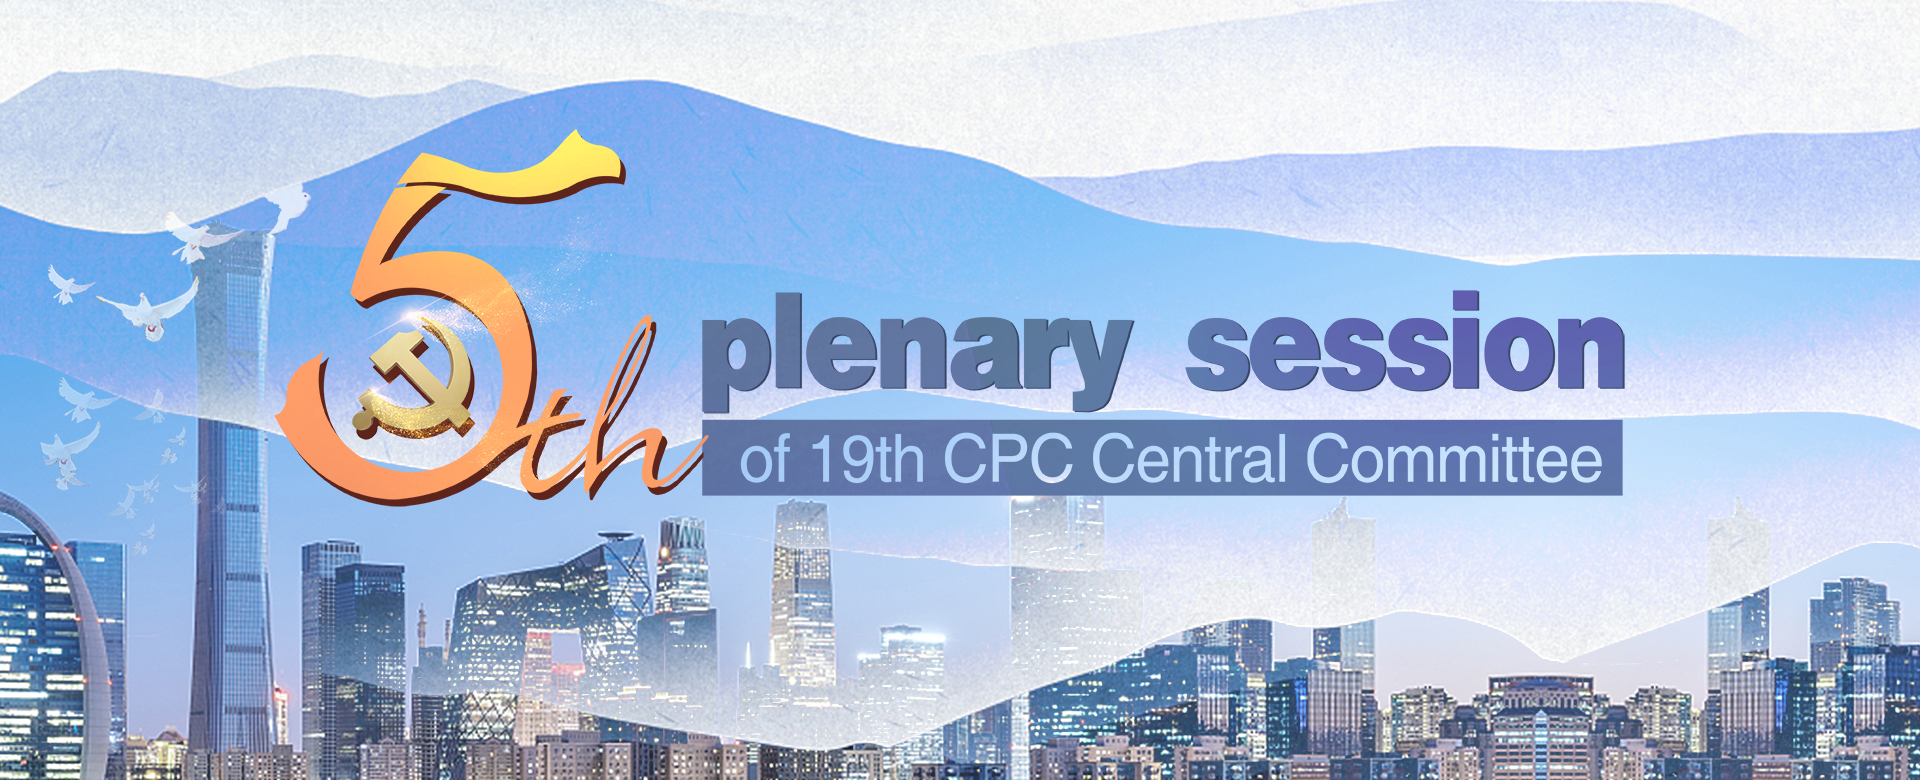 5th plenary session of 19th CPC Central Committee